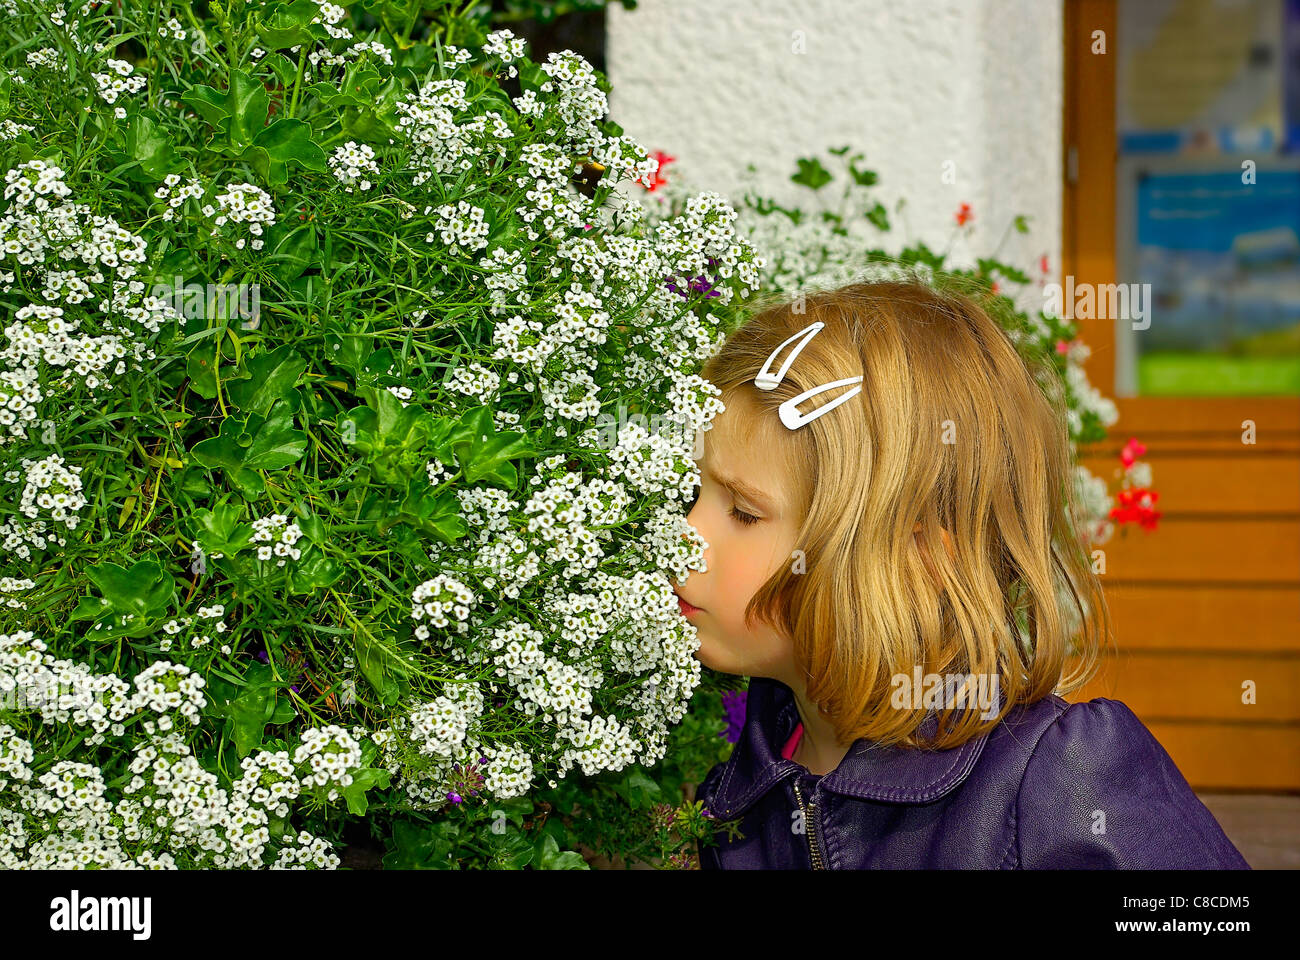 A little girl is taking a smell at a bunch of white blossom flowers. Stock Photo